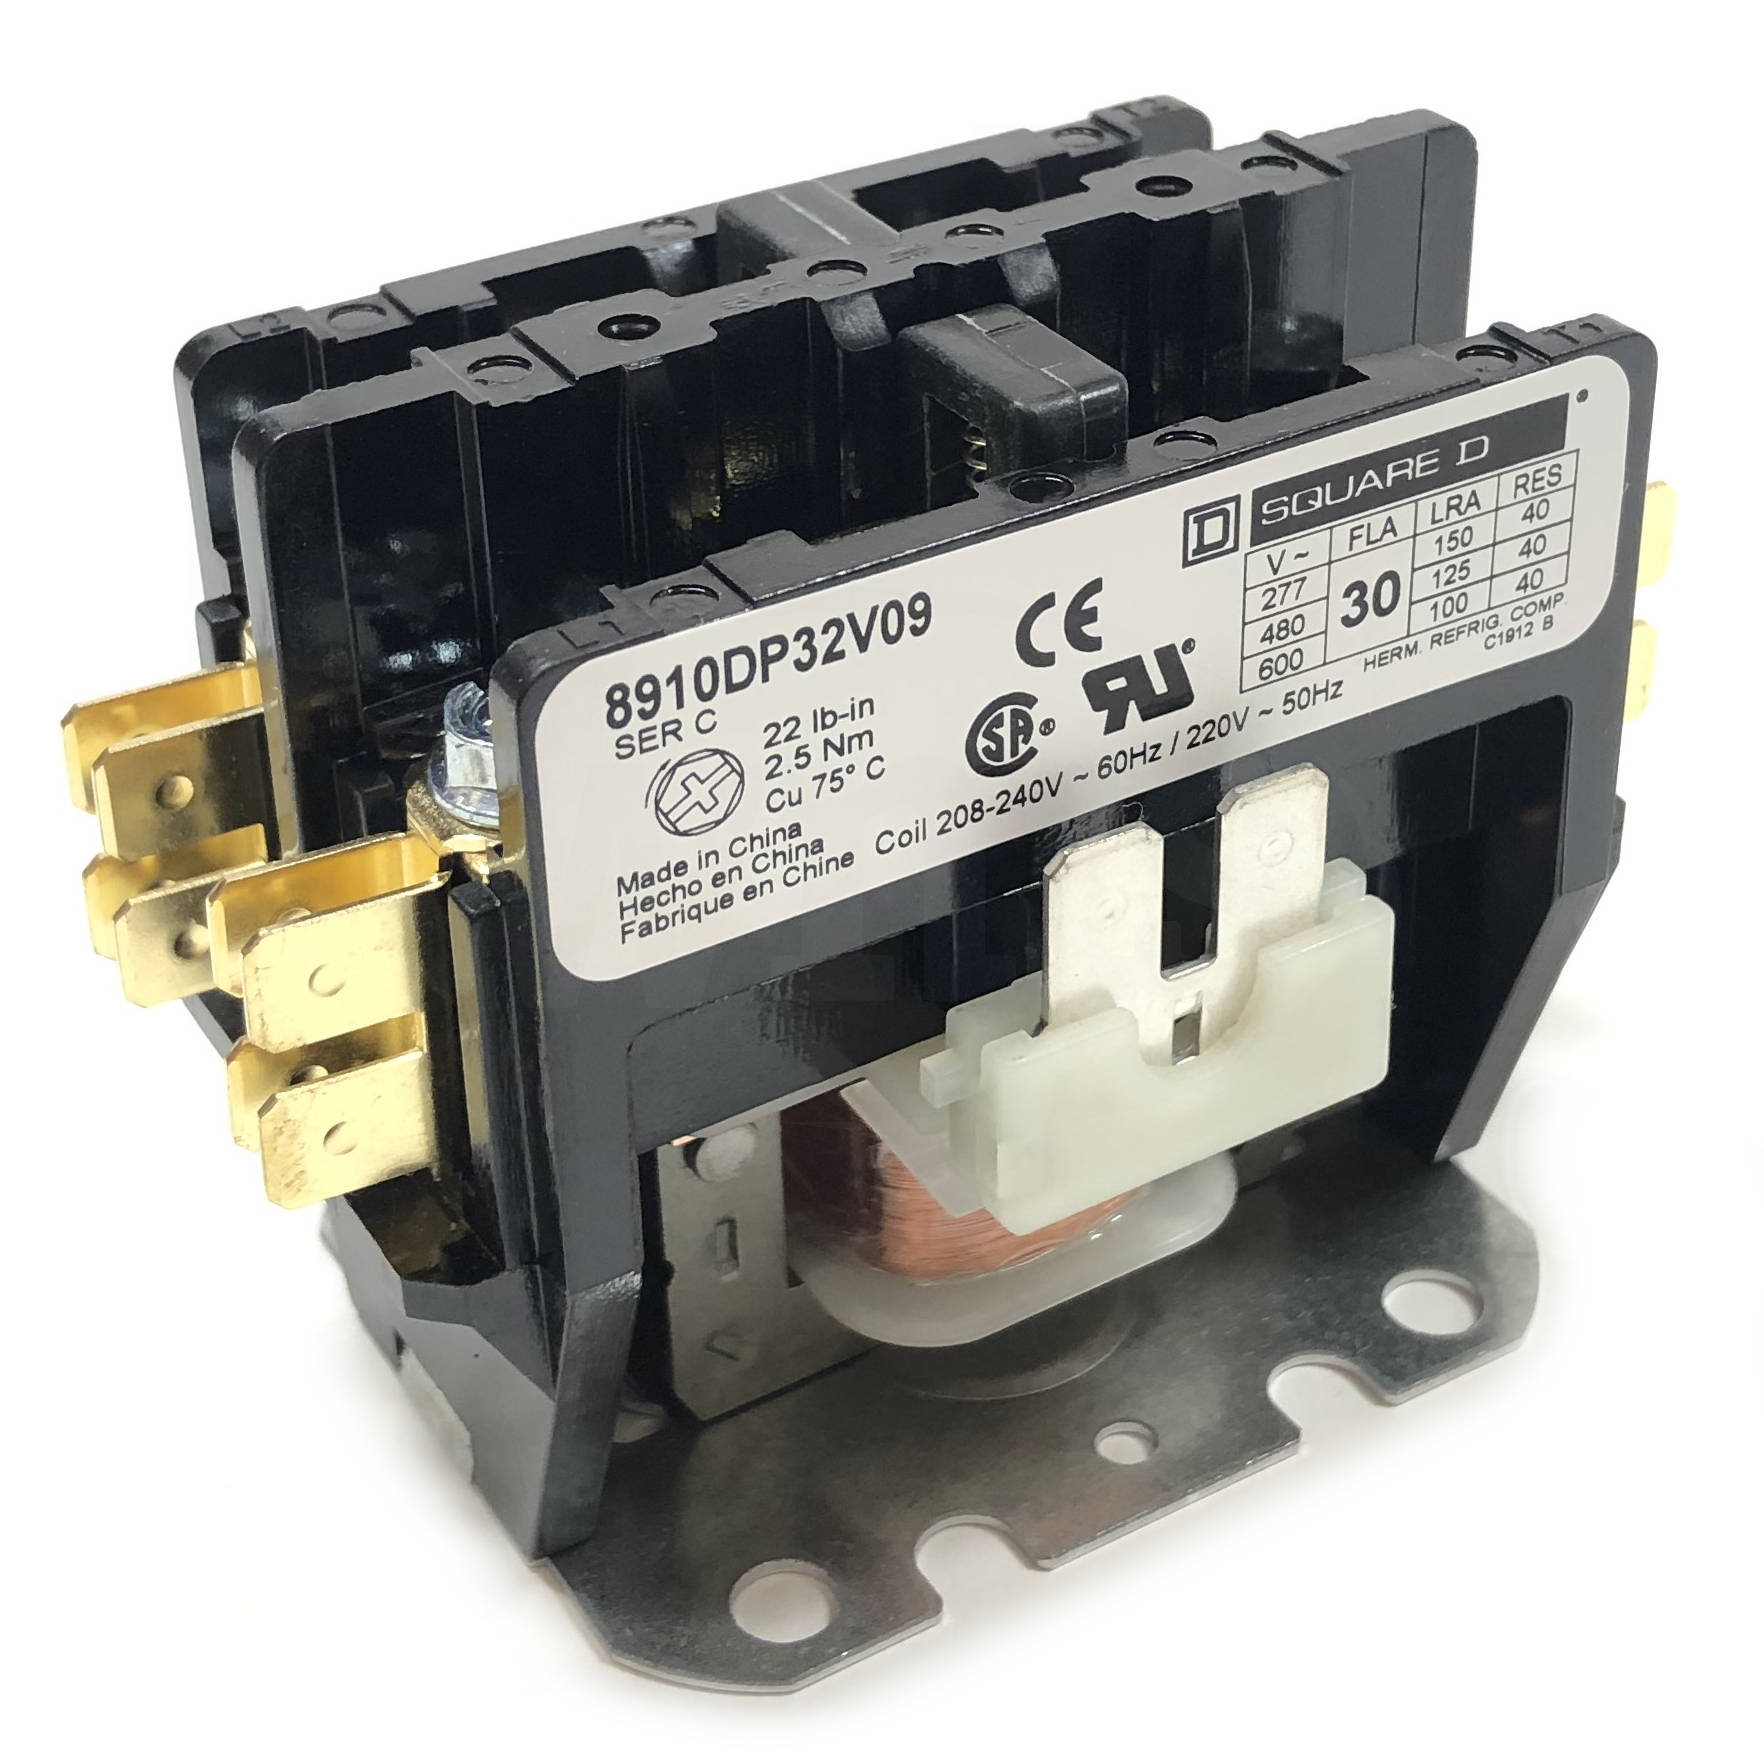 Details about   Square D By Schneider Electric 8910DP31V09 208/240VAC Non-Reversing Definite